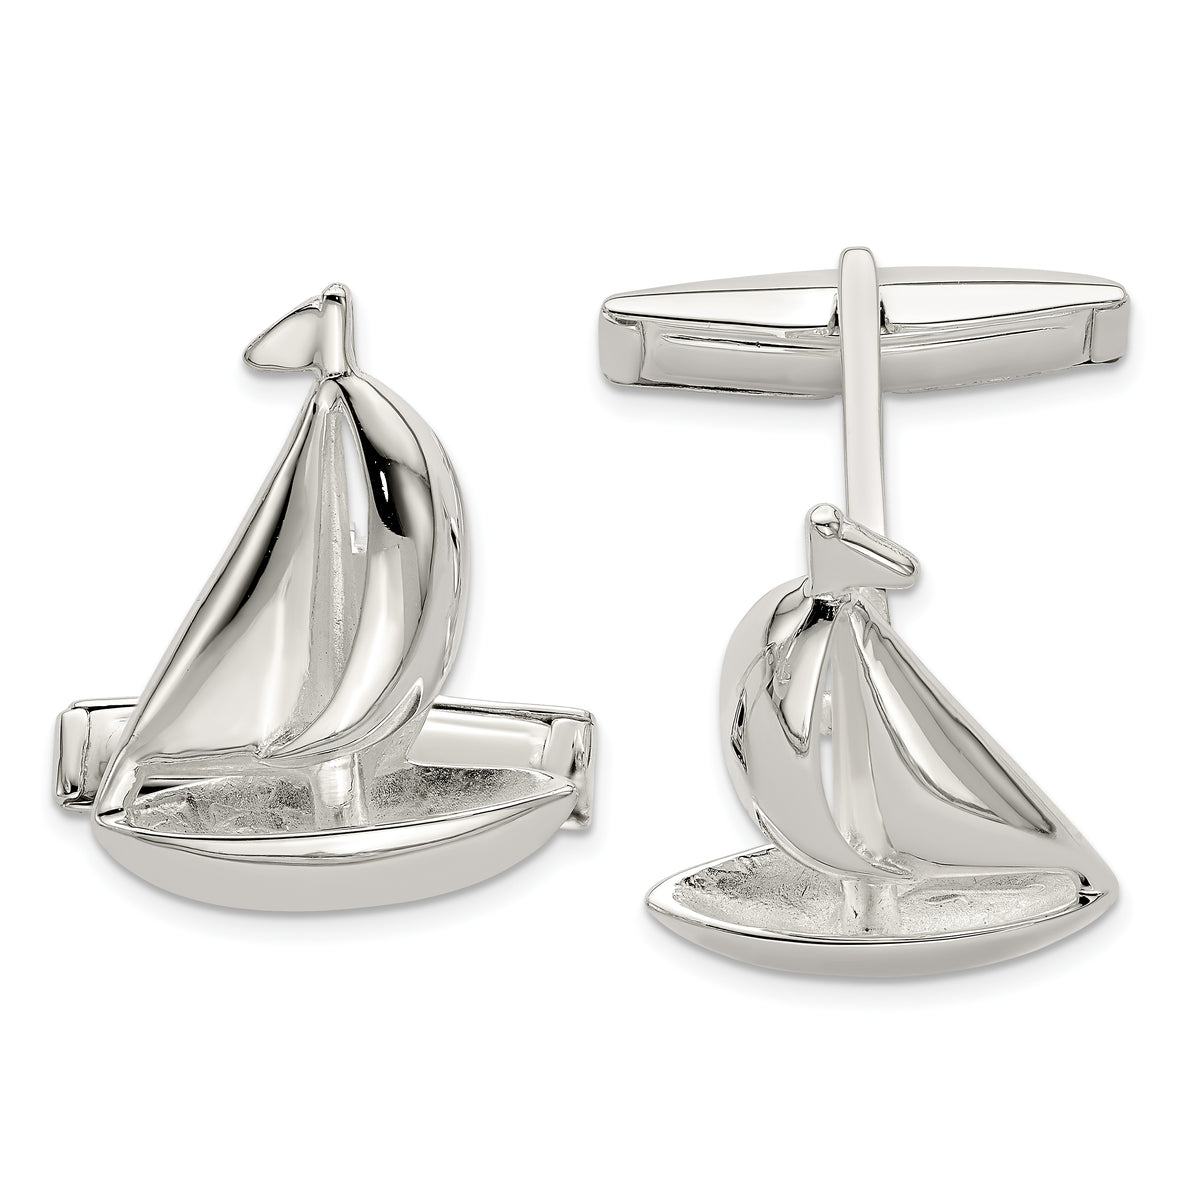 Sterling Silver Sail Boat Cuff Links